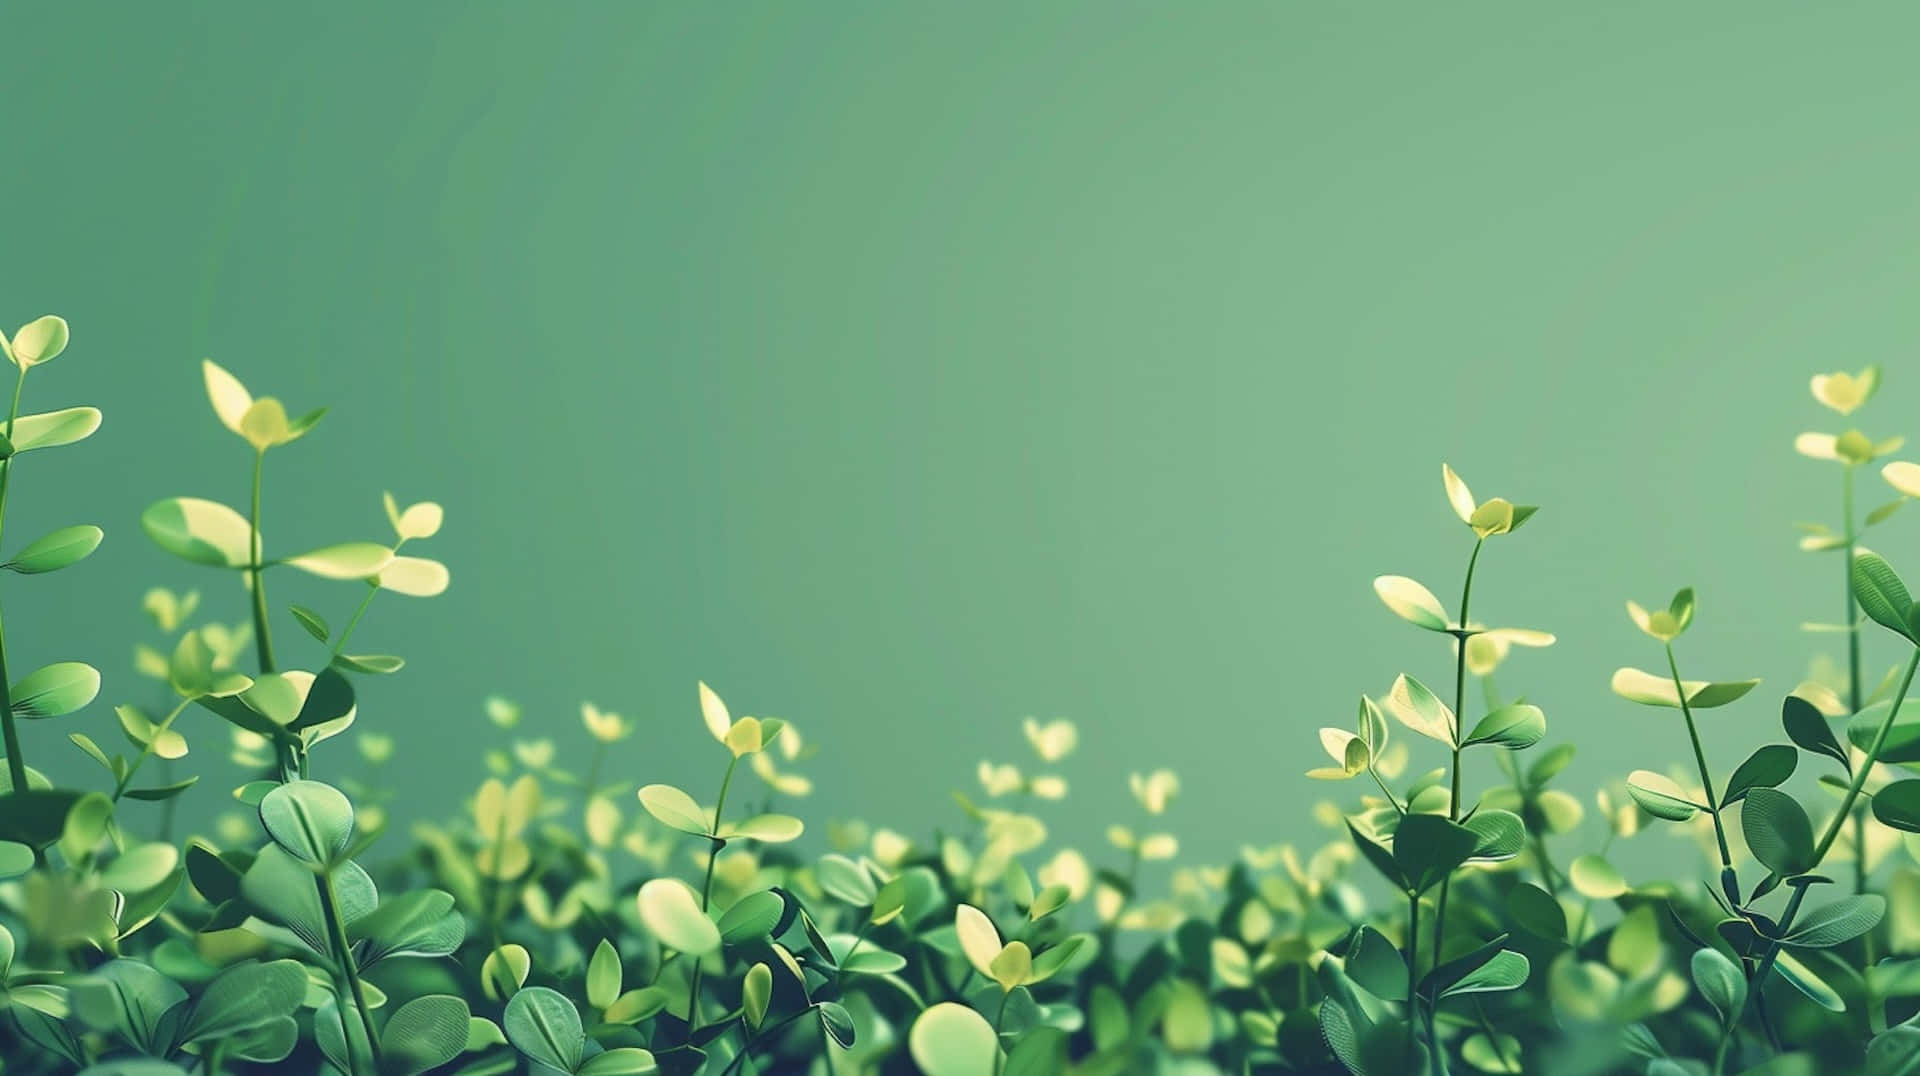 Green Aesthetic Plant Growth Background Wallpaper